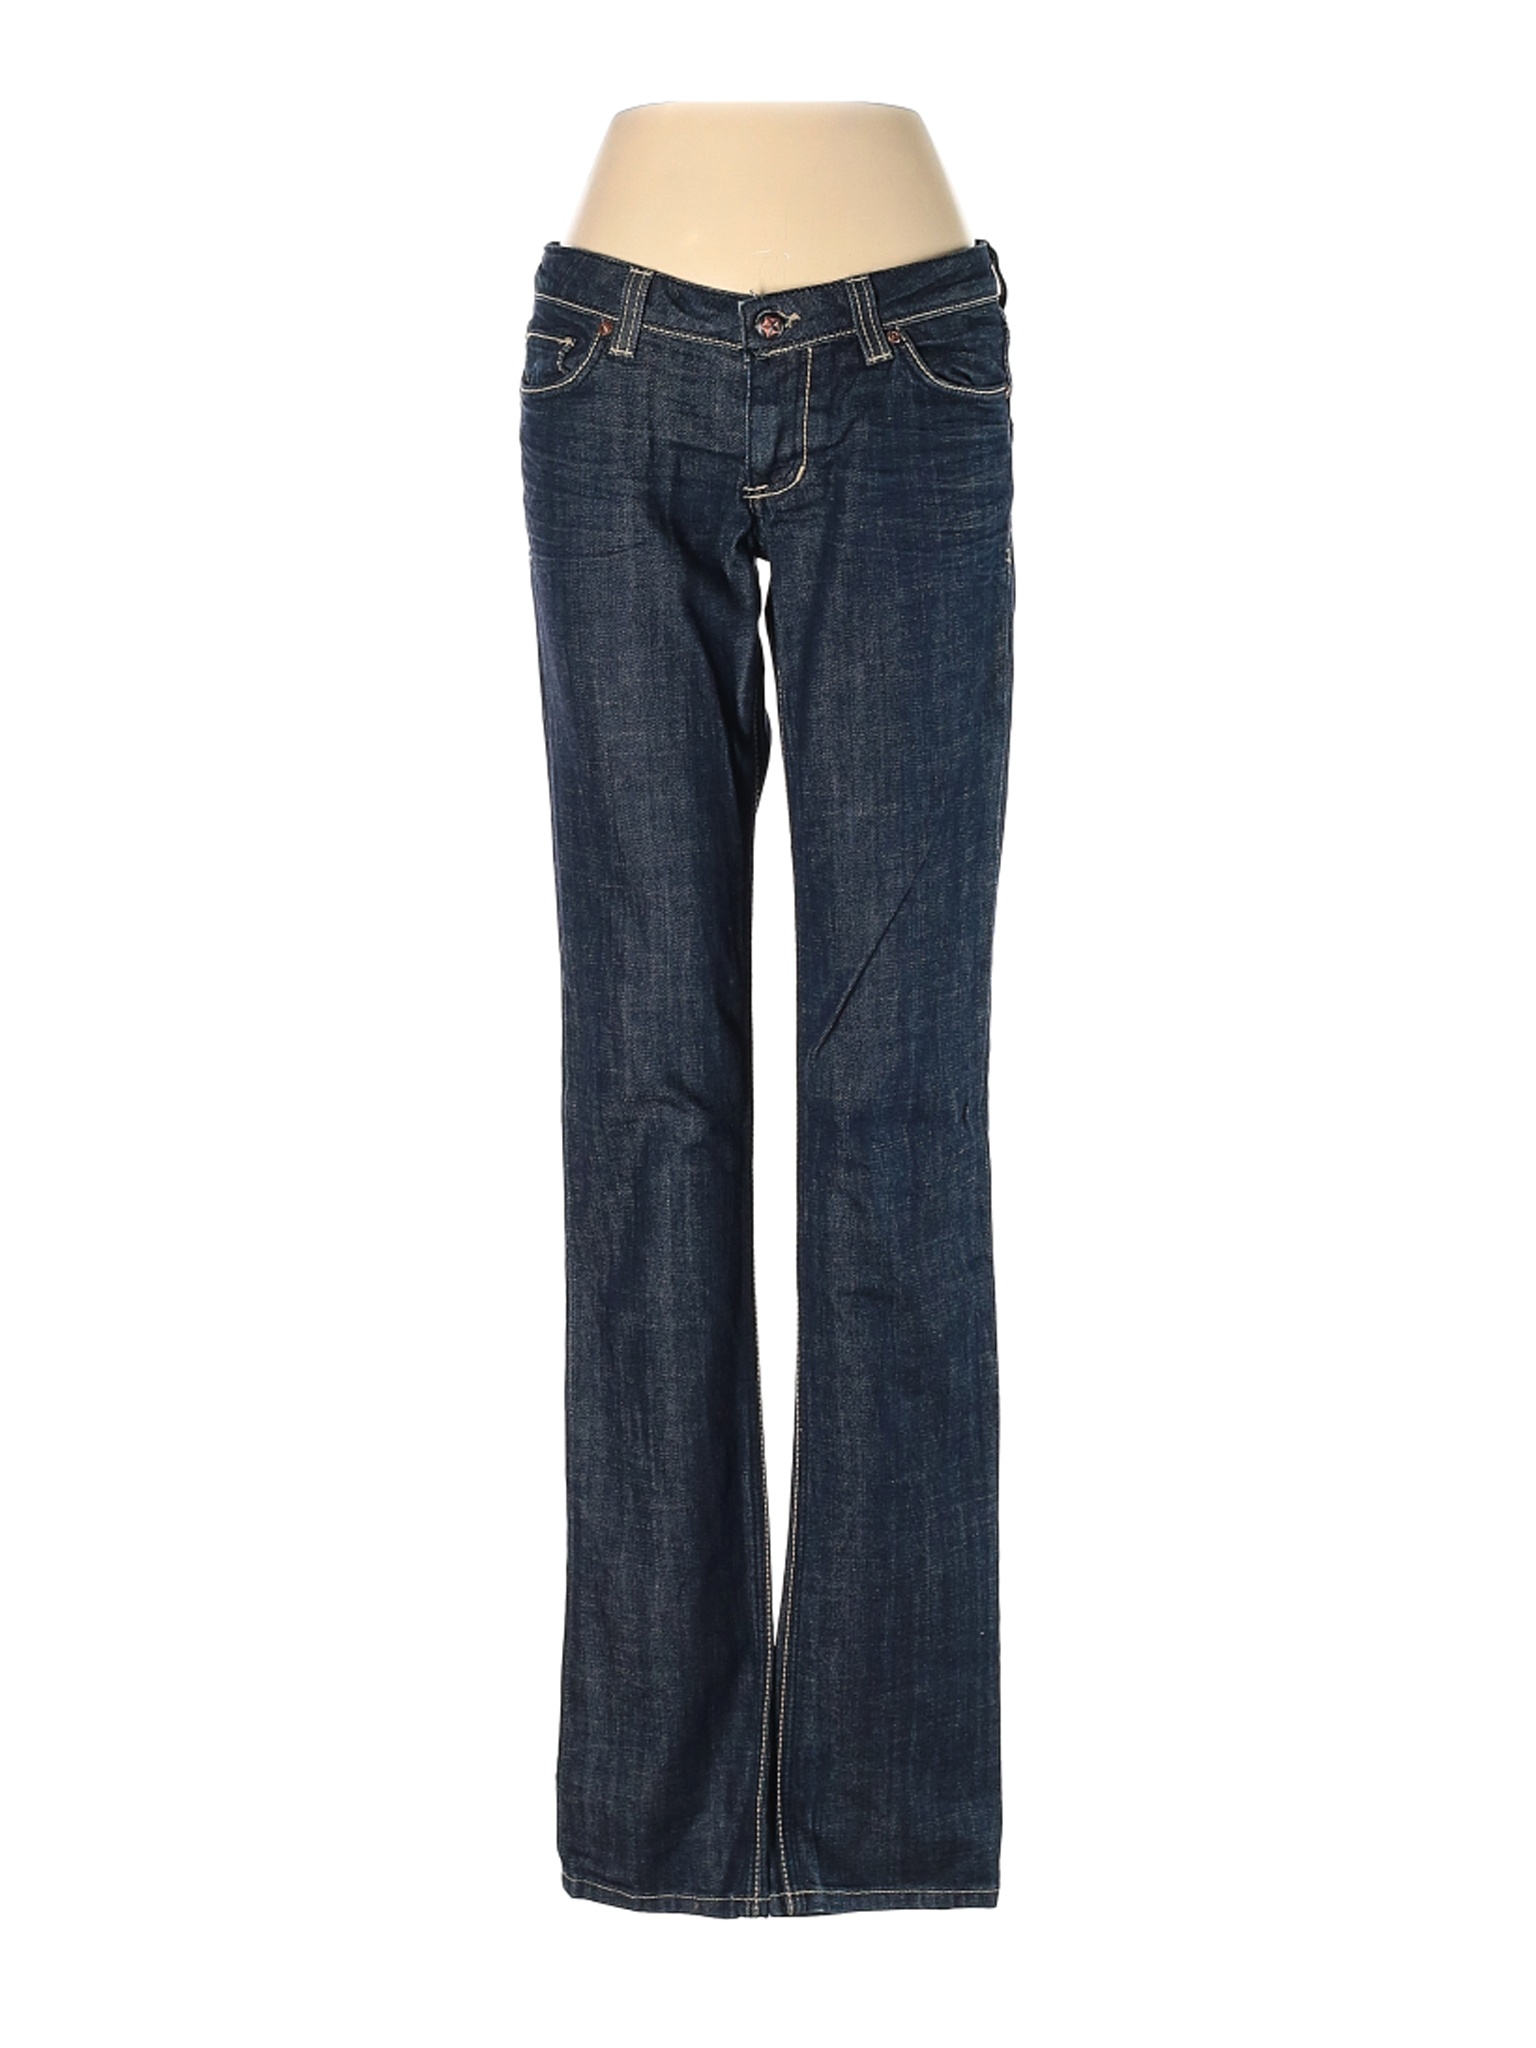 people's liberation women's jeans